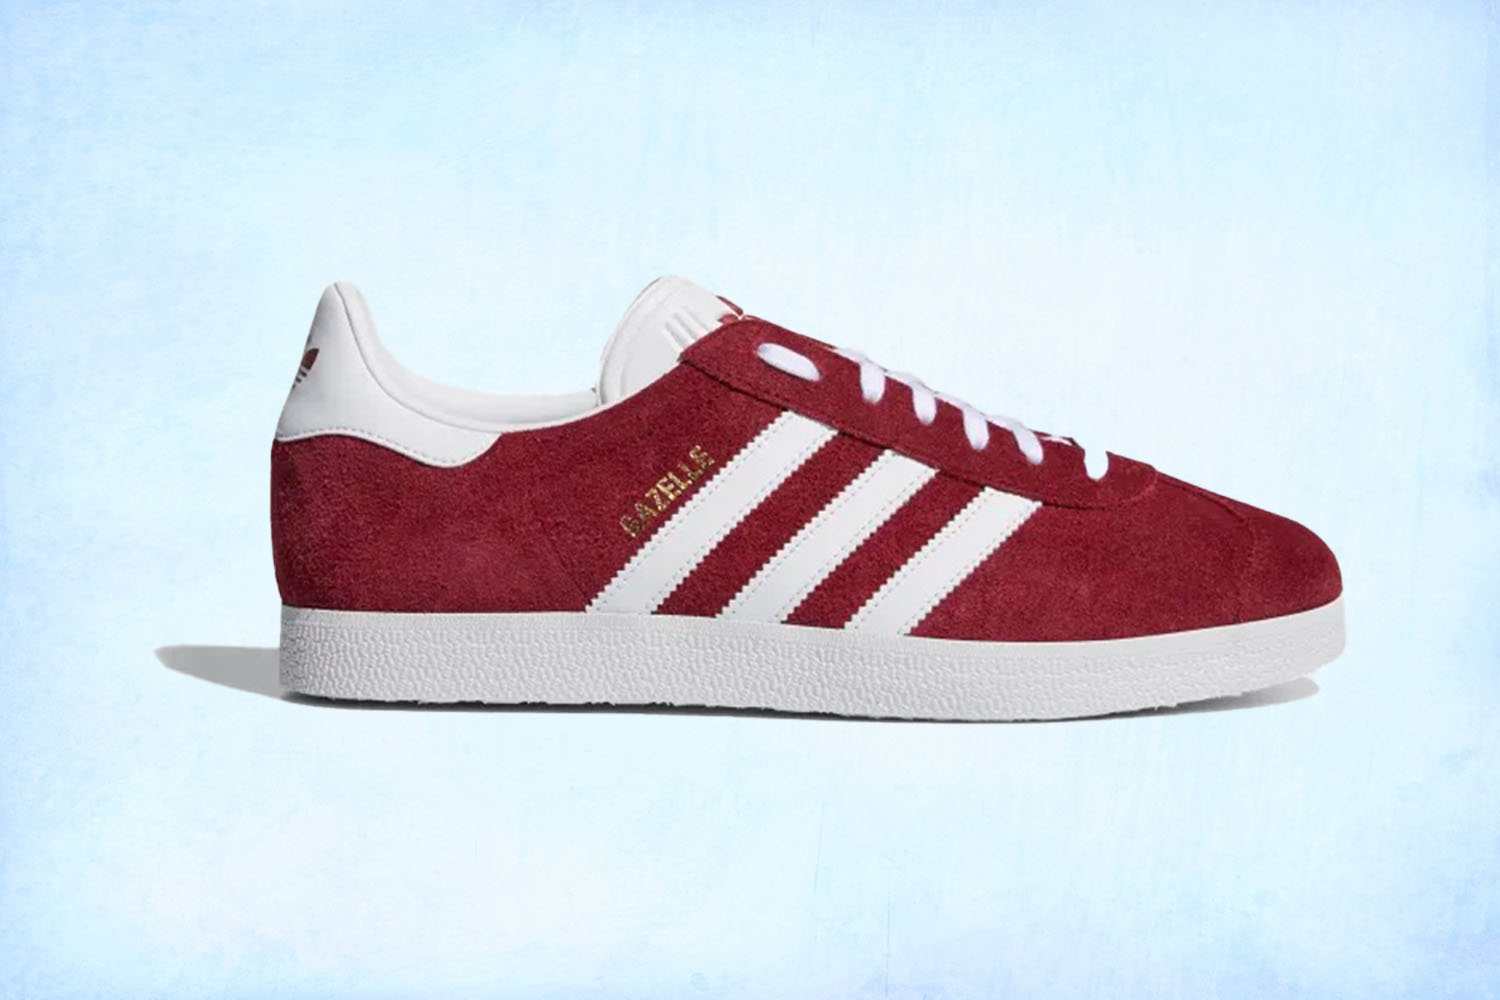 a red Adidas Gazelle sneaker on a light blue background